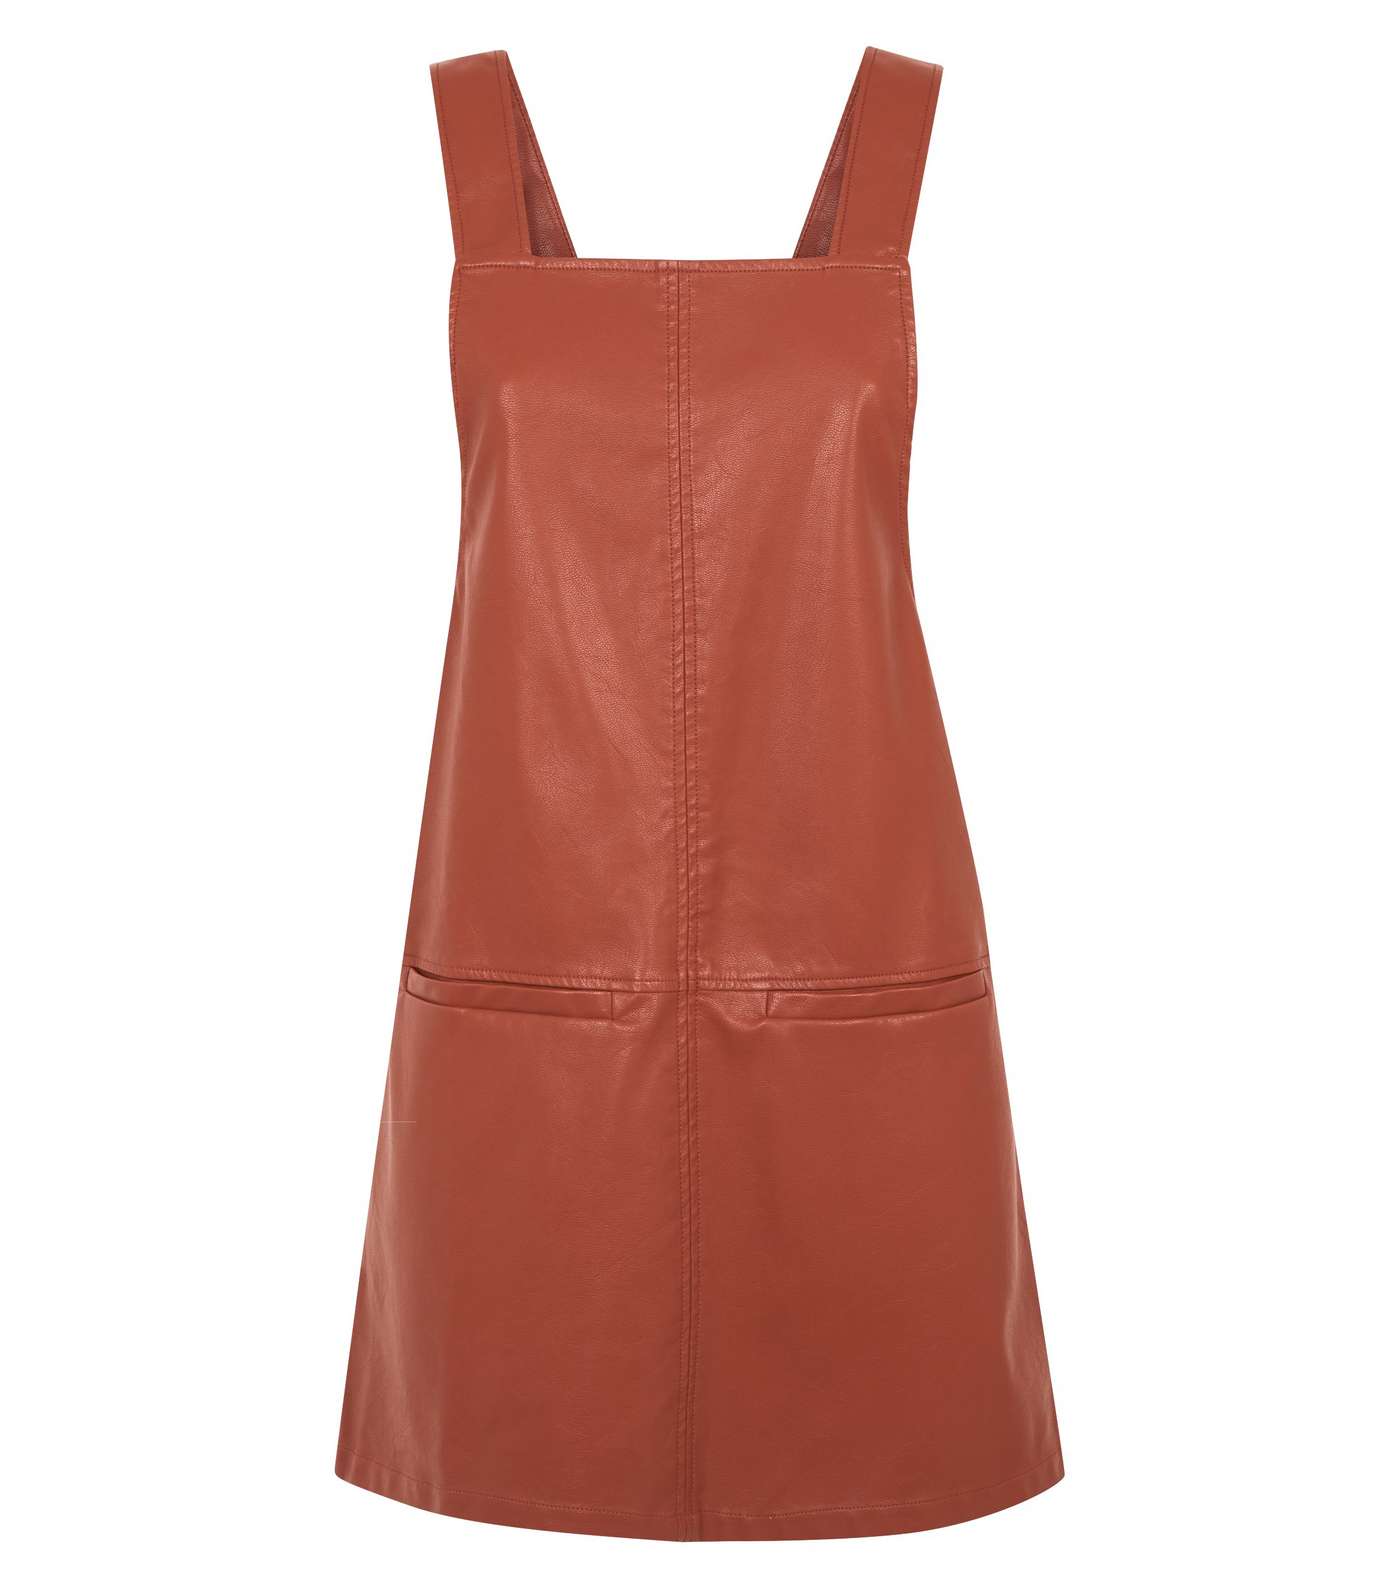 Tan Leather-Look Pinafore Dress Image 3